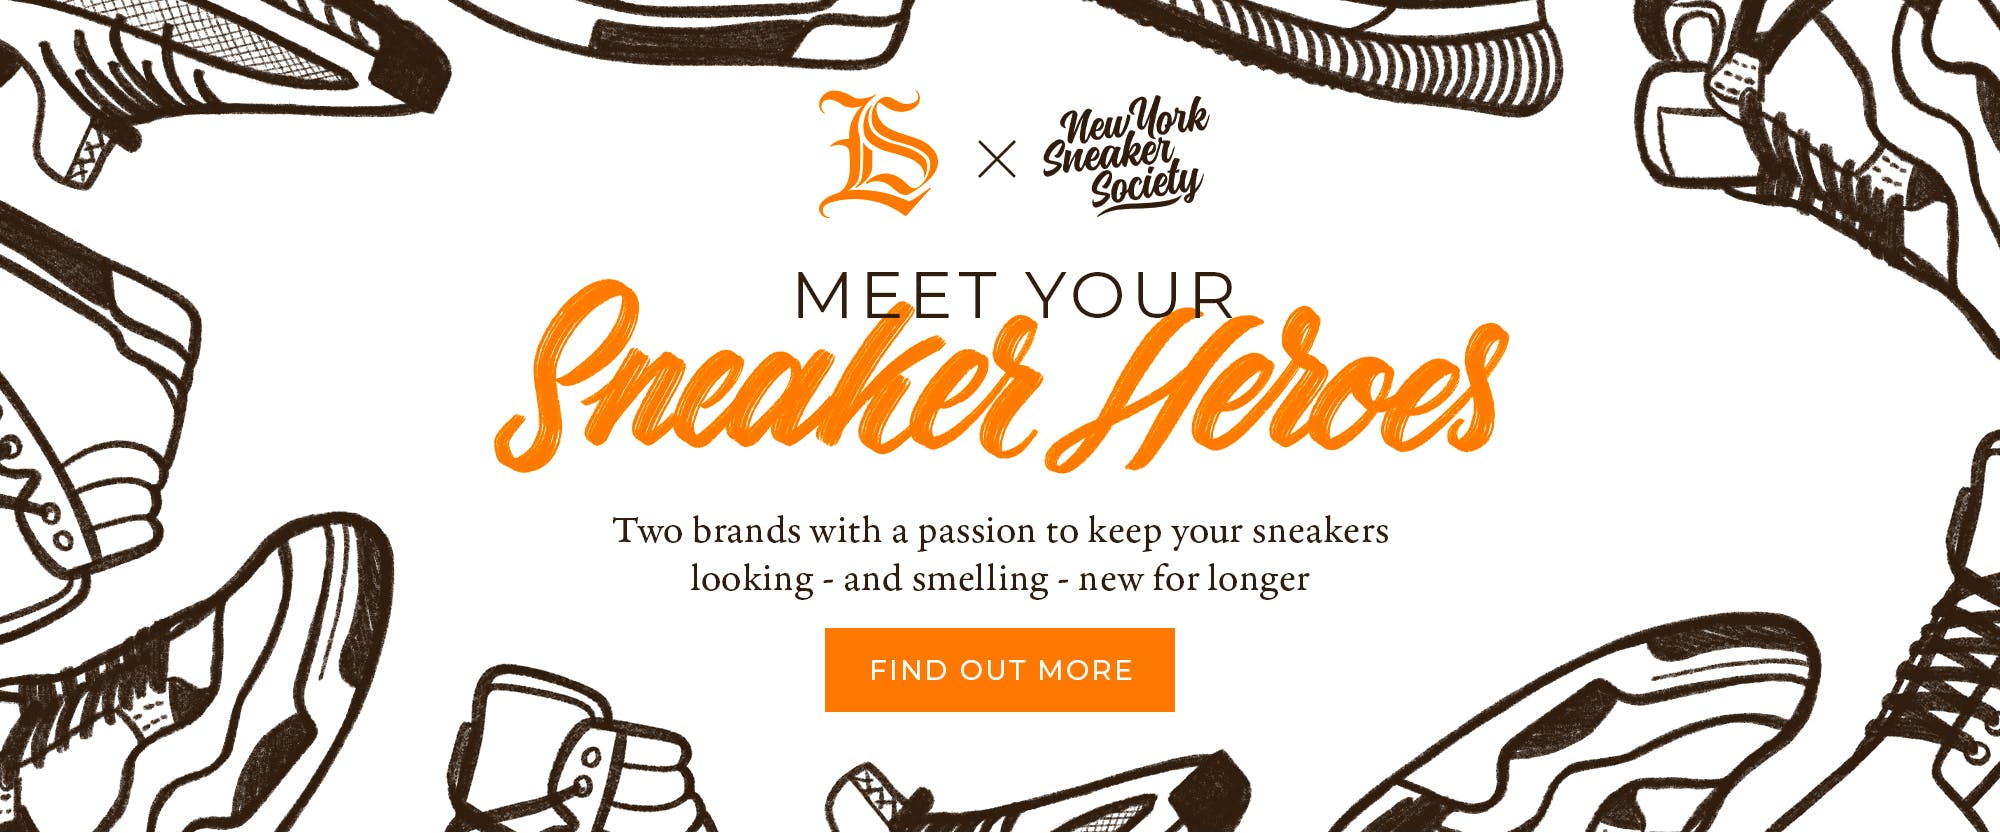 Meet your sneaker heroes. Two brands with a passion to keep your sneakers looking - and smelling - new for longer.